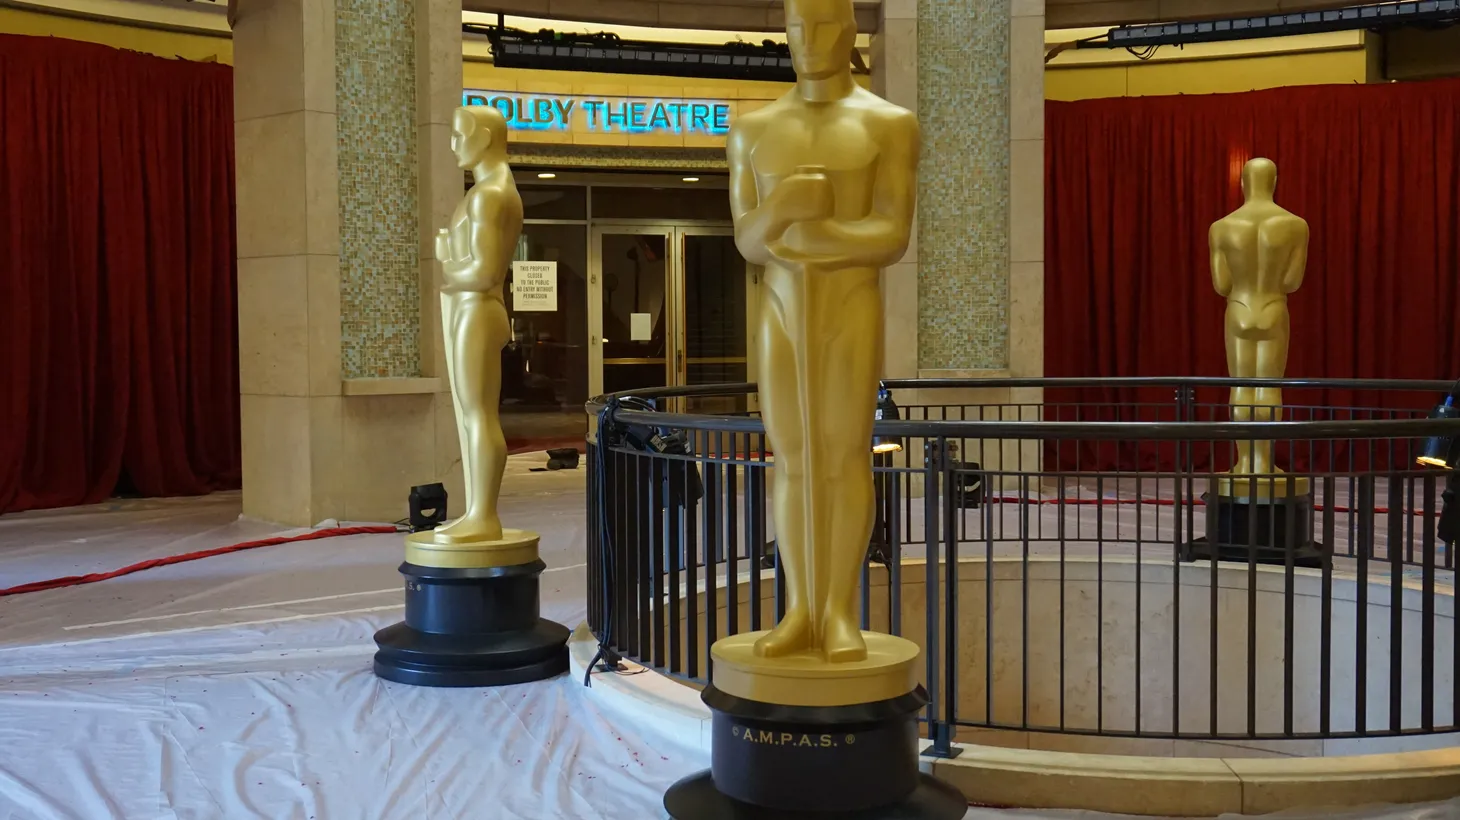 Large golden Oscar statues guard the entrance to the Dolby Theatre where the Academy Awards are held.